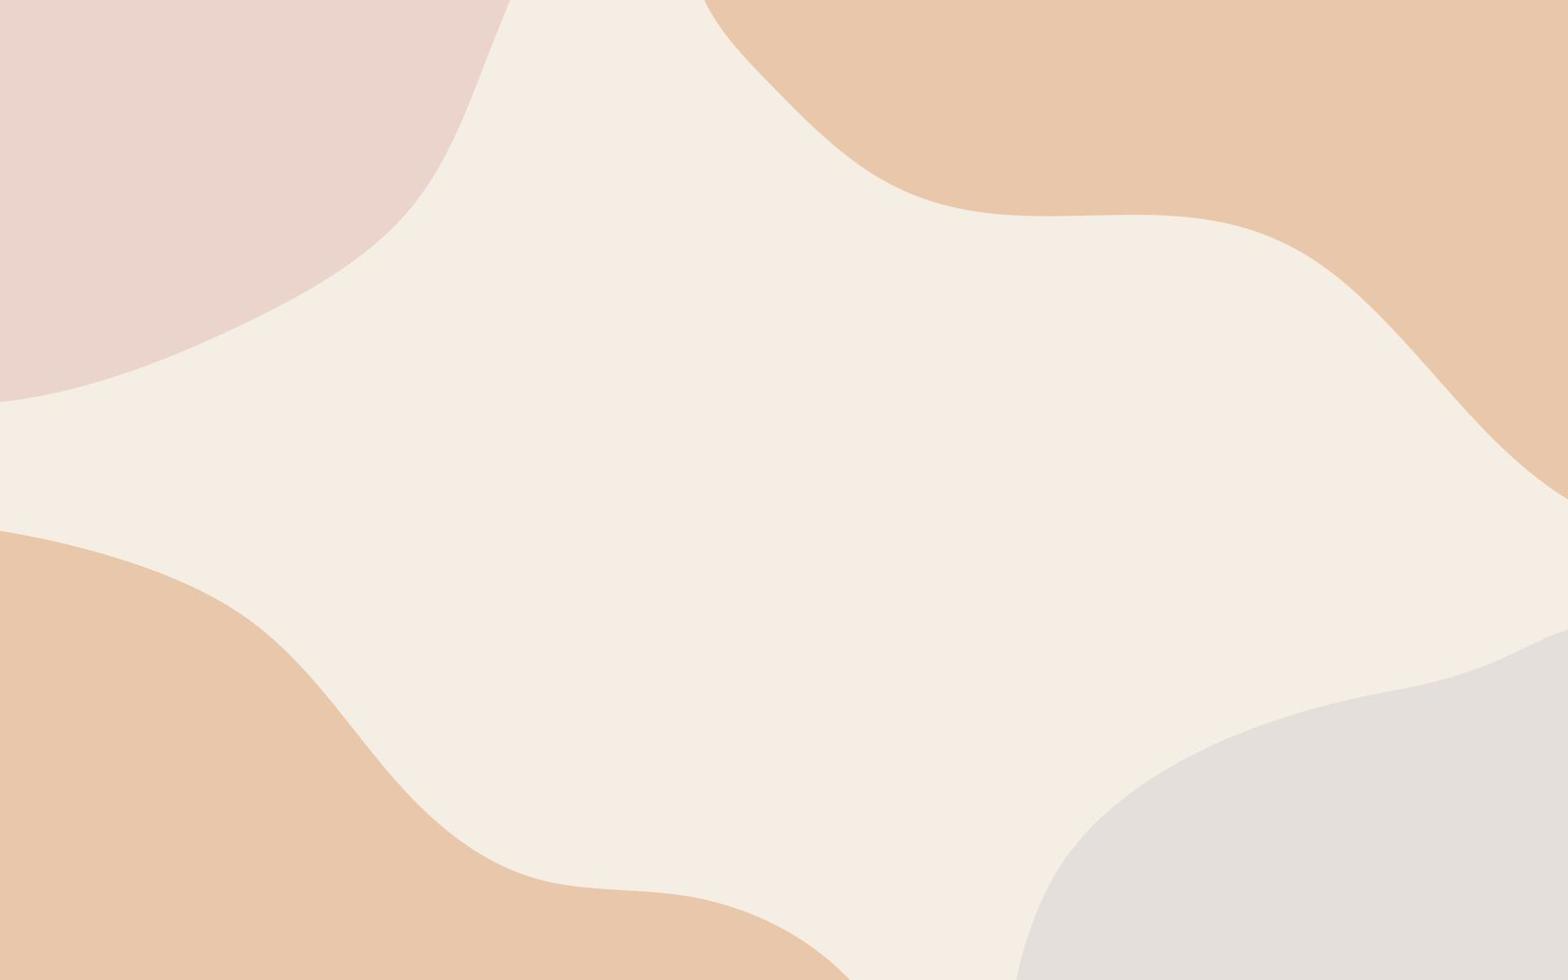 Fashion stylish templates abstract shapes and line in nude pastel colors. Neutral background in minimalist style. Contemporary vector Illustration